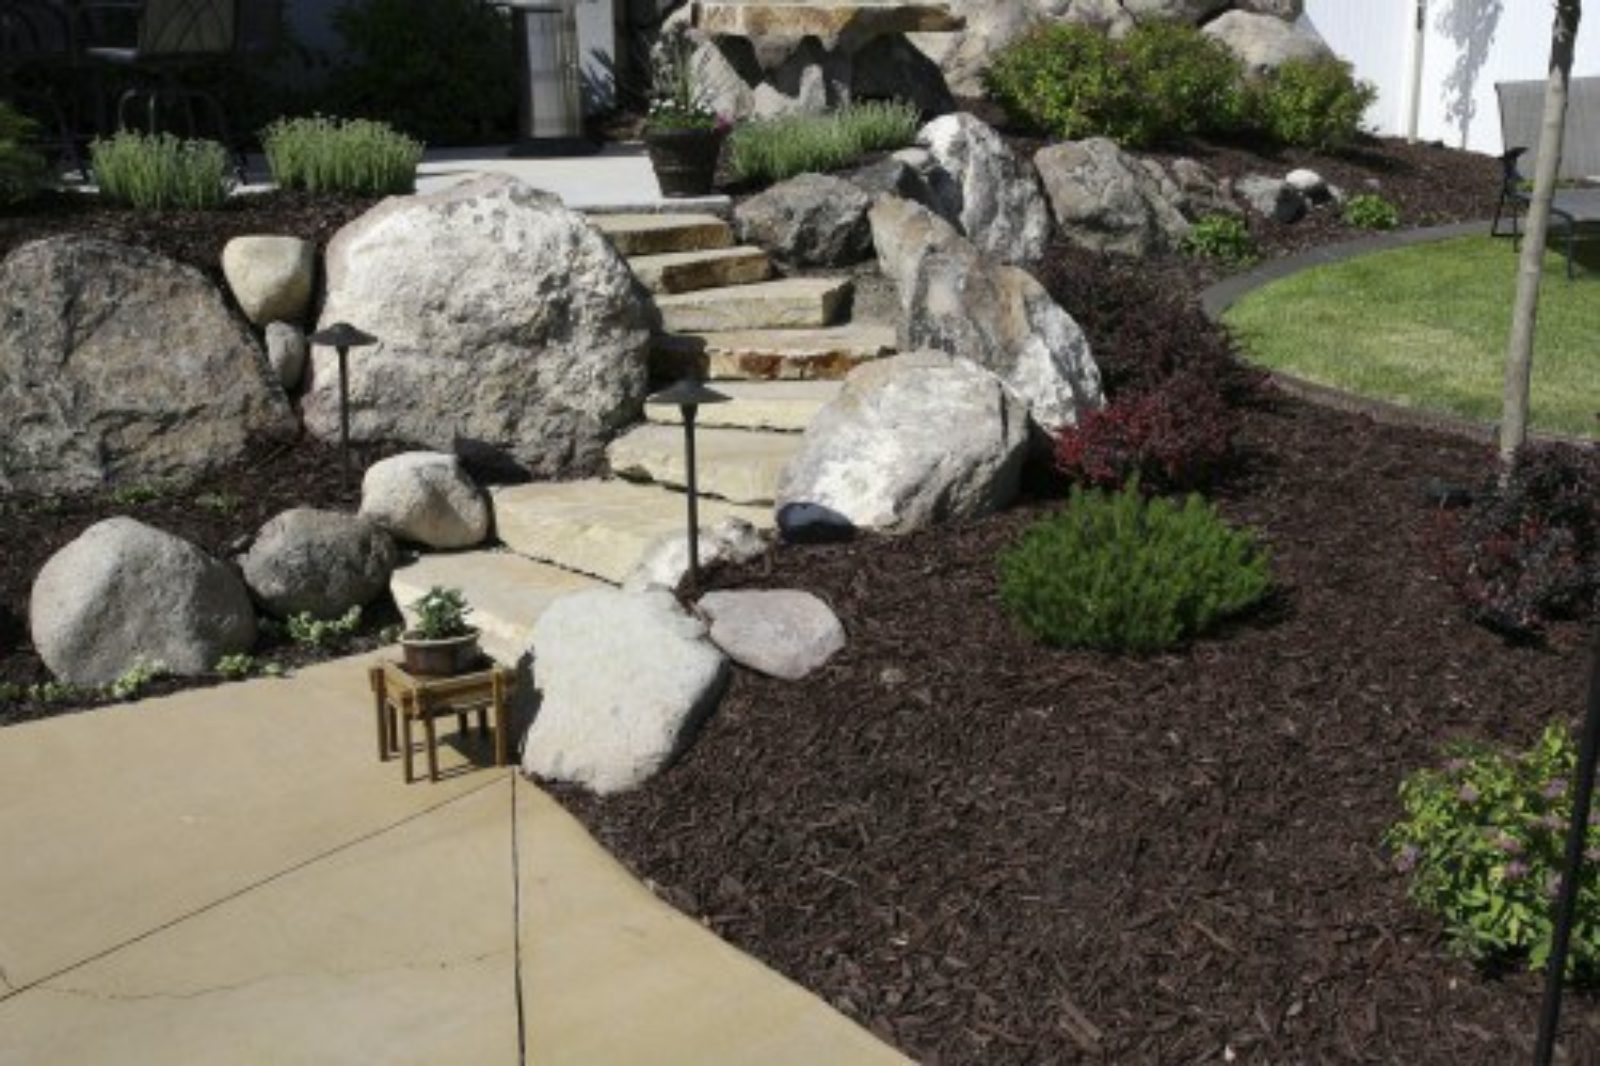 Boulders Kalamazoo Natural Rocks, Where To Get Free Boulders For Landscaping